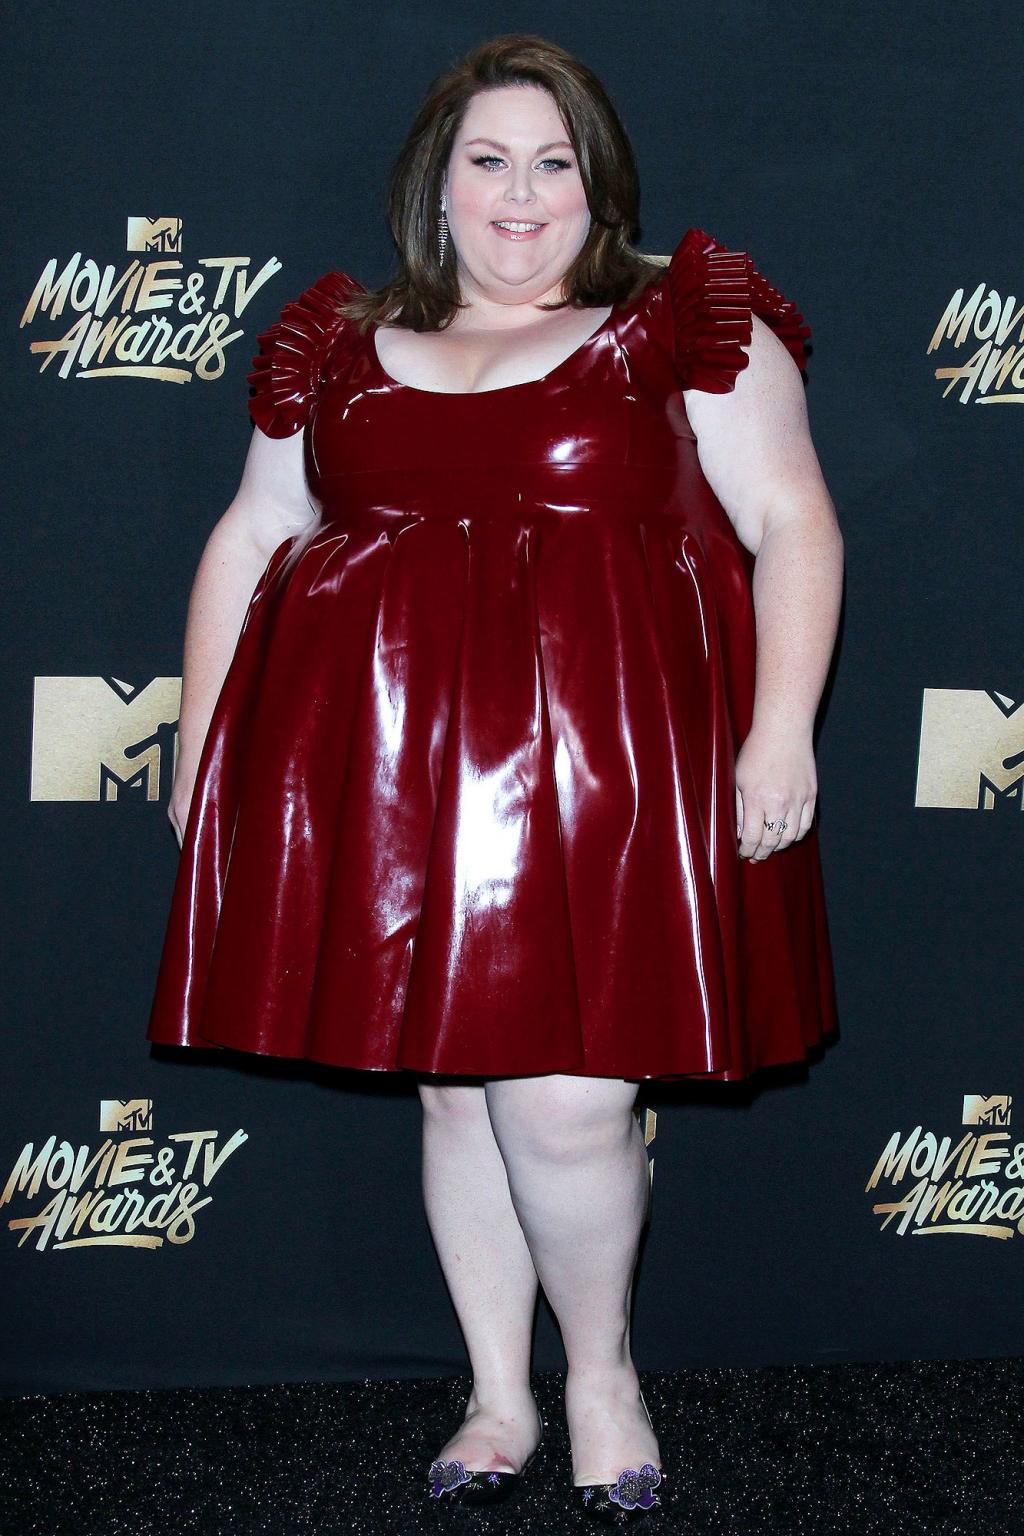 Chrissy Metzâ€™s MTV Movie & TV Awards Latex Dress Was a Year in the Making